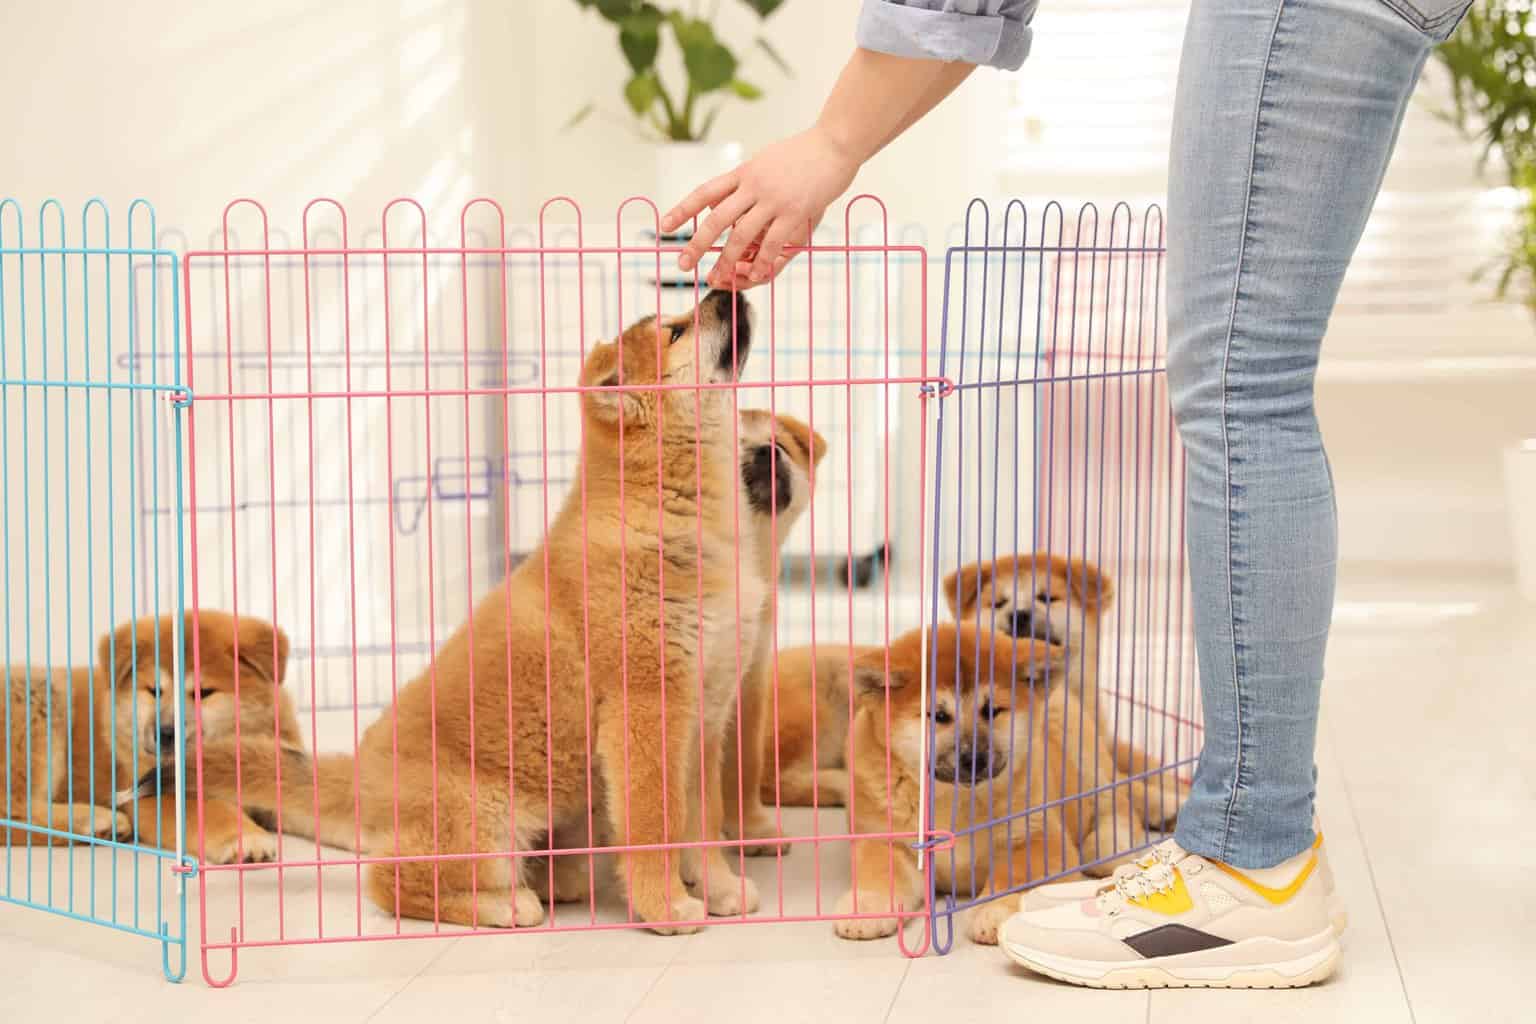 Owner looks at Shiba Inu puppies in puppy playpen.